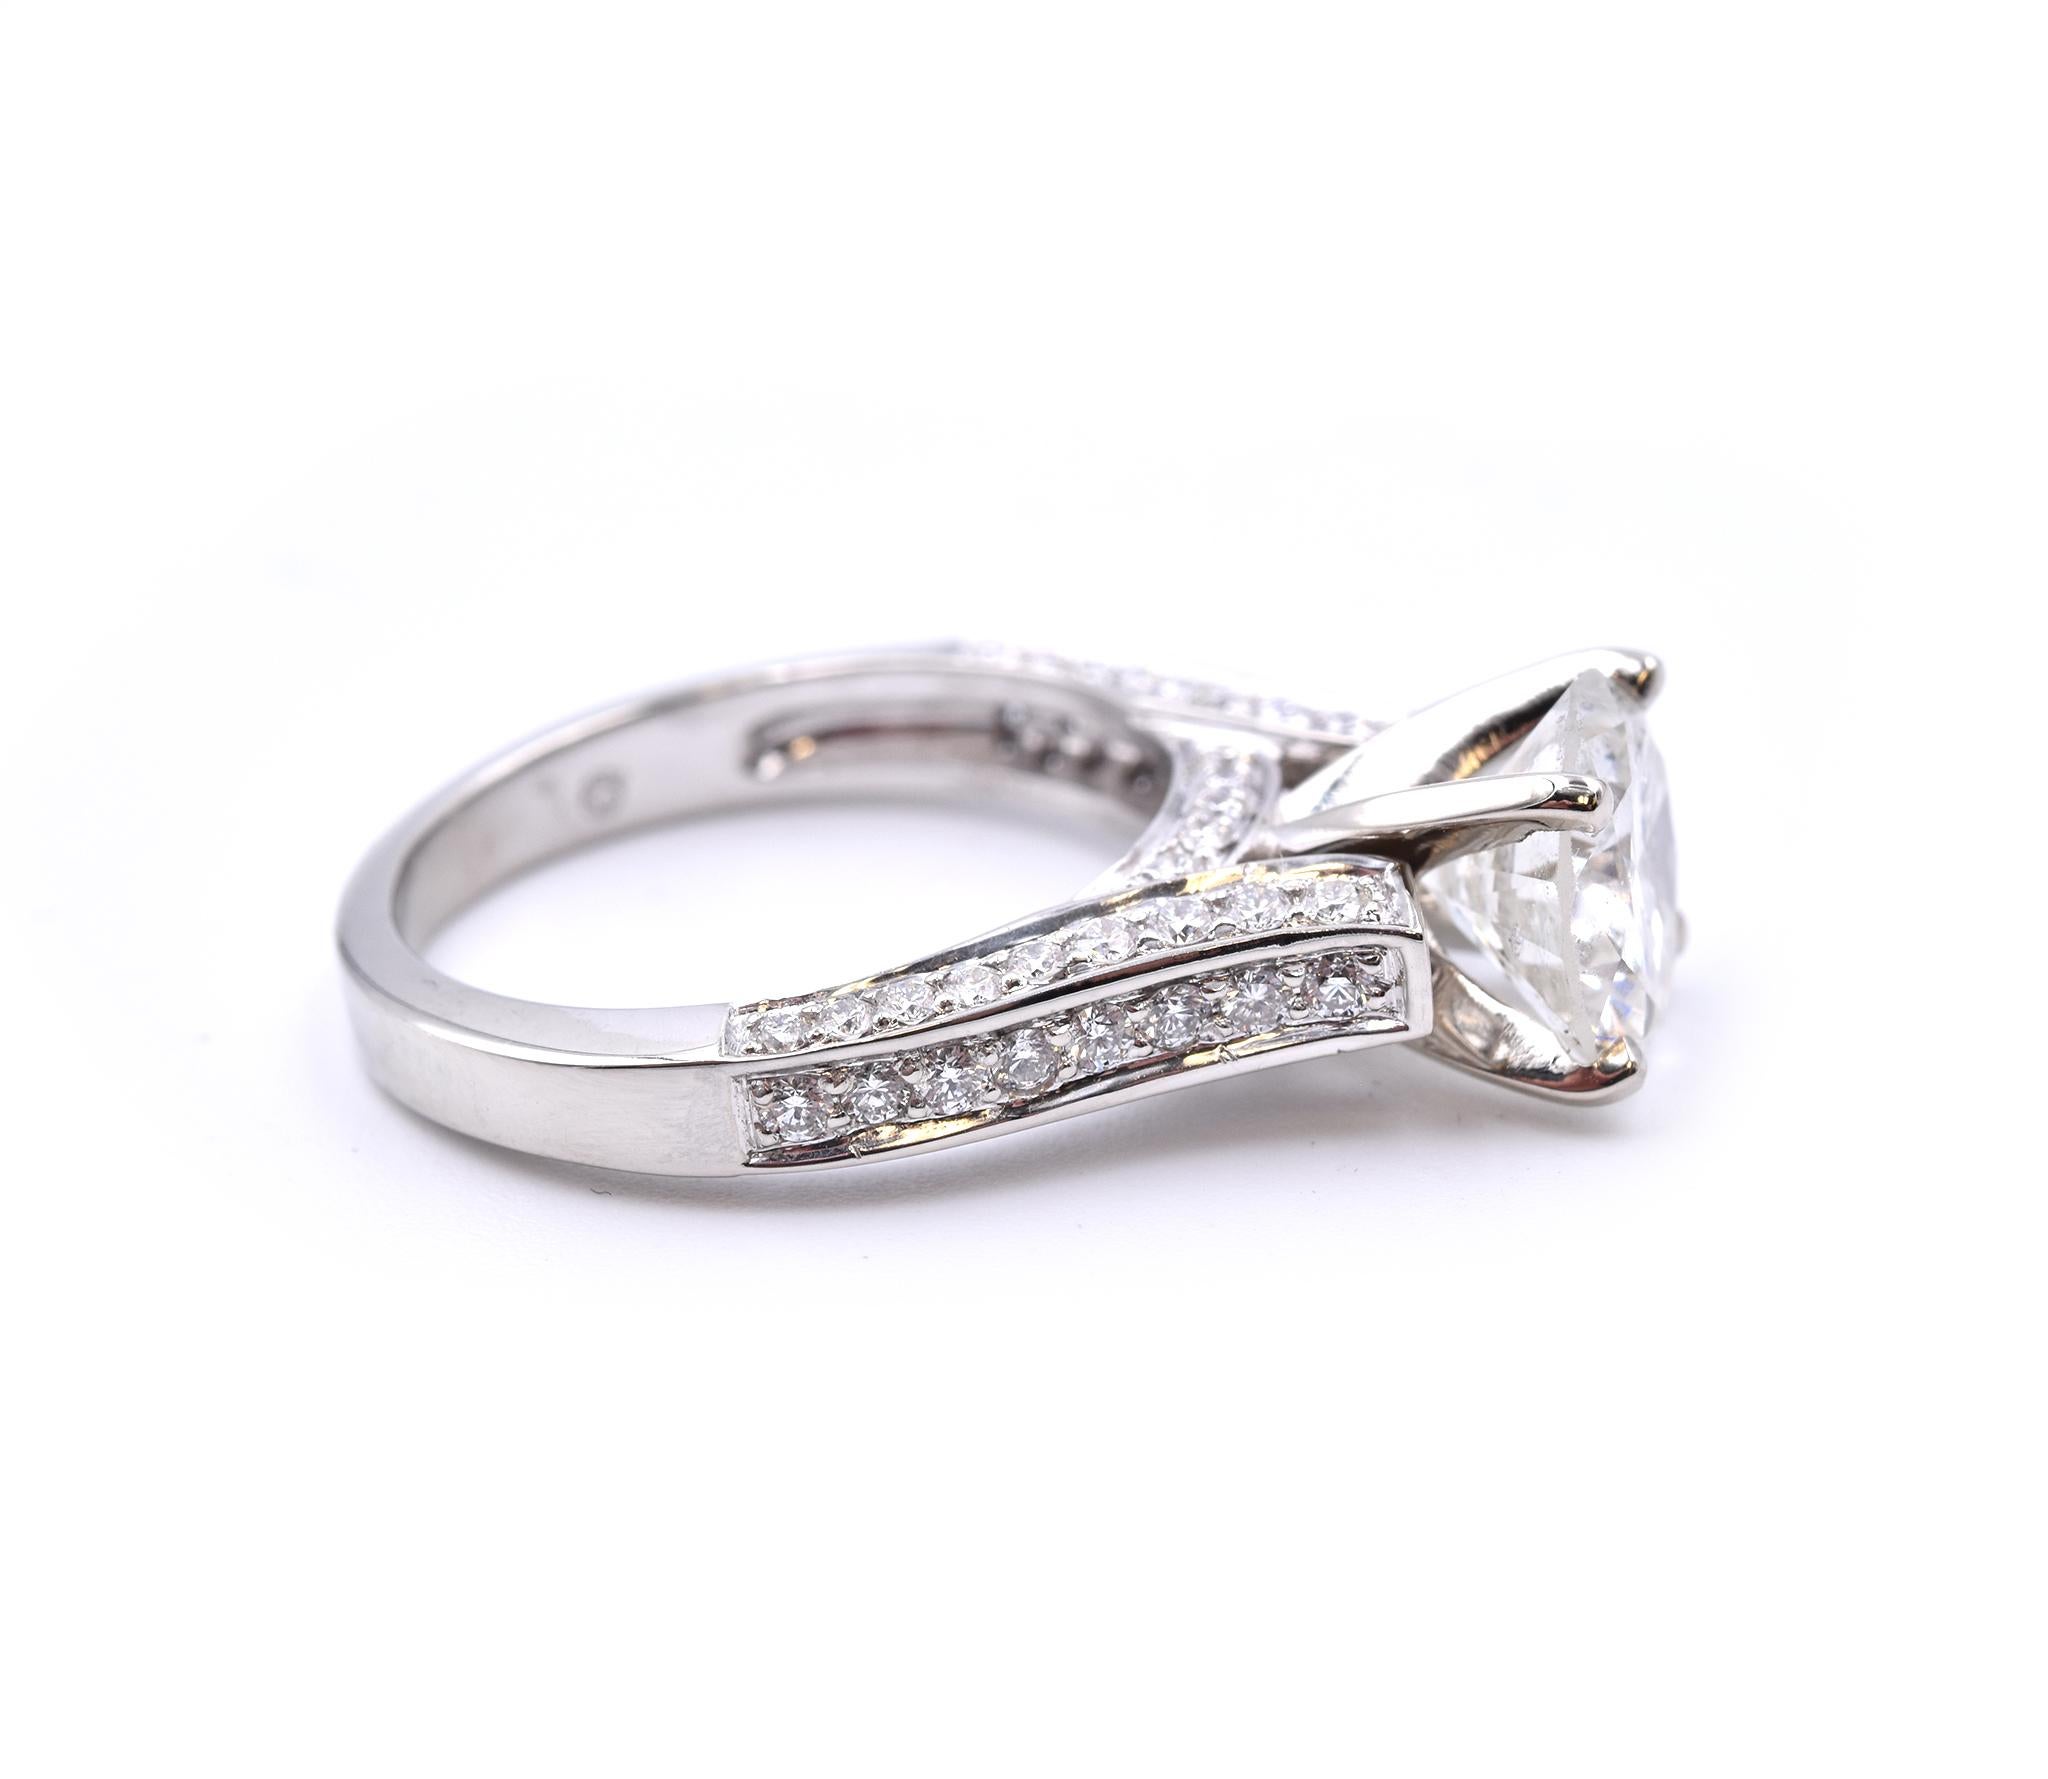 Material: 14k white gold 
Diamond: 2.32ct round brilliant 
Color: K
Clarity: I1
Diamond: 62 round brilliant cut = .91cttw
Color: G
Clarity: VS
Ring Size: 7 (please allow up to 2 additional business days for sizing requests)
Dimensions:  ring head